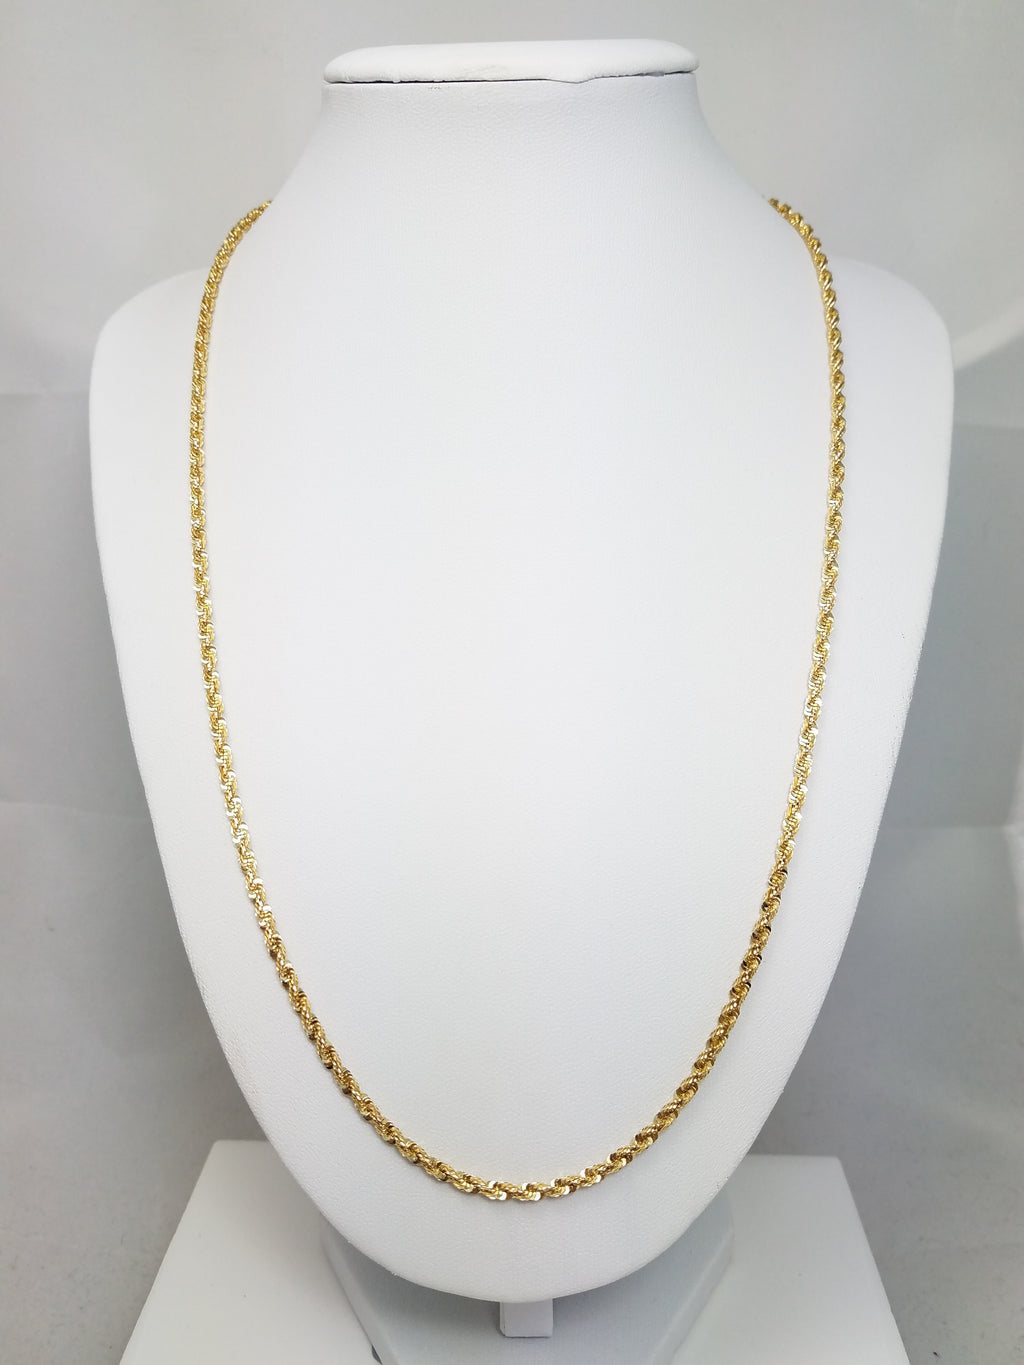 22" 13k Solid Yellow Gold Sparkle Chain Necklace